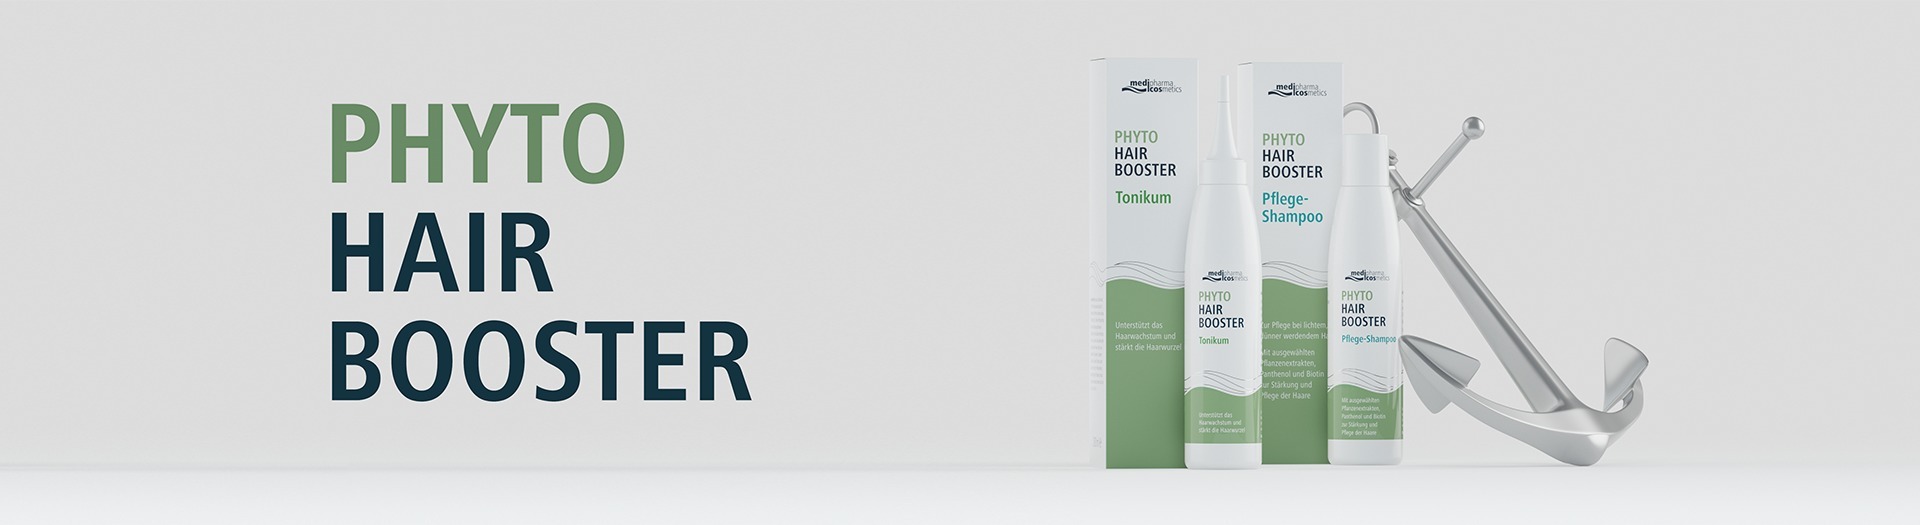 Phyto Hair Booster